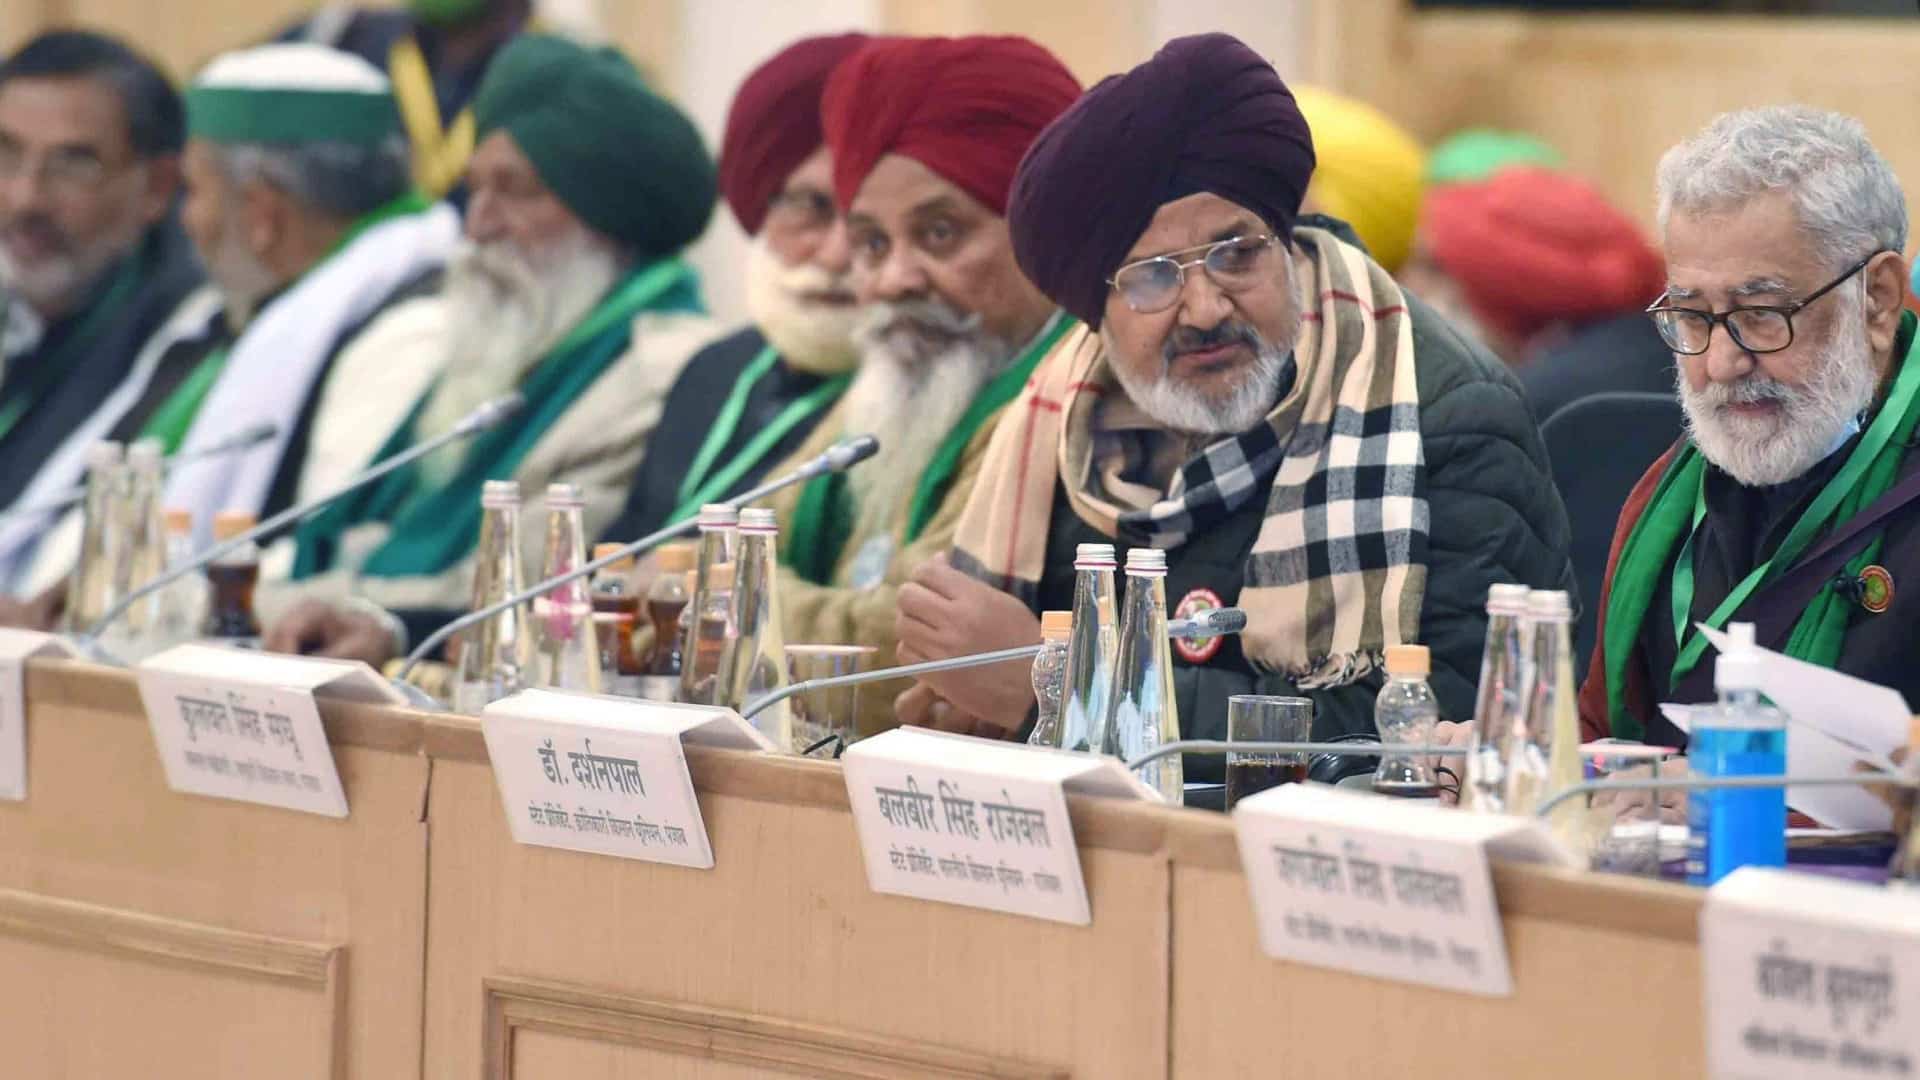 Govt's 10th round of talks with protesting farmers ends; Next meeting on Jan 22